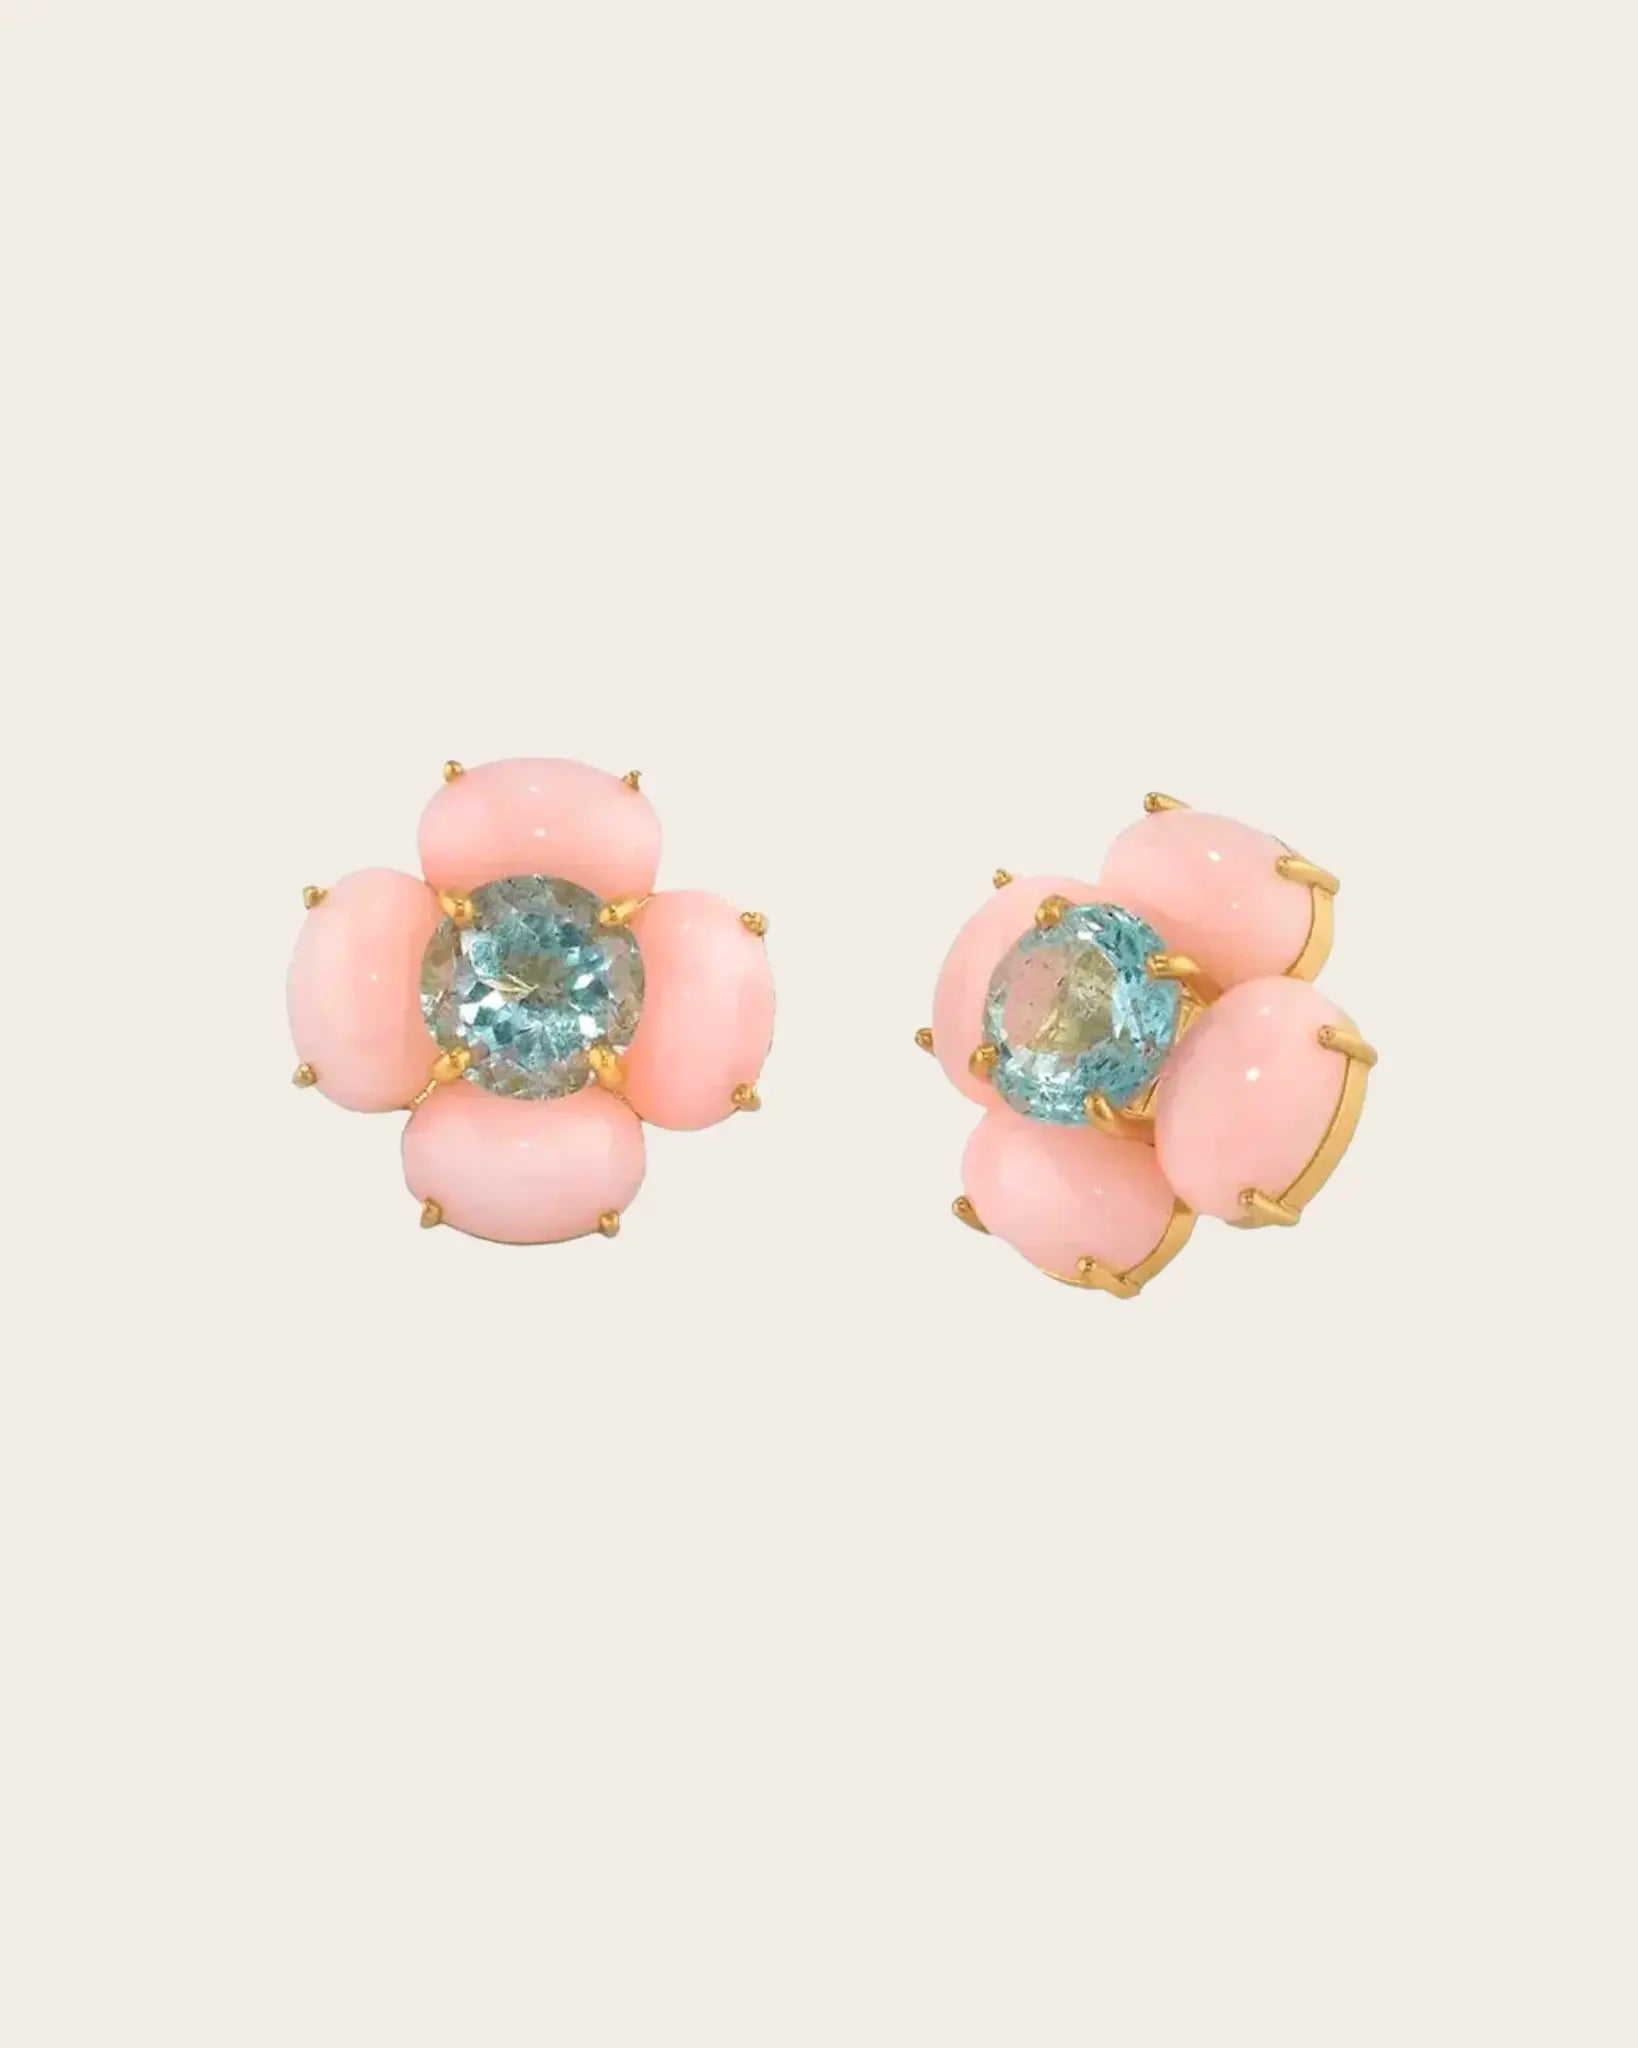 One-of-a-kind Opal and Aquamarine Flower Stud Earrings One-of-a-kind Opal and Aquamarine Flower Stud Earrings Irene Neuwirth Irene Neuwirth  Squash Blossom Vail